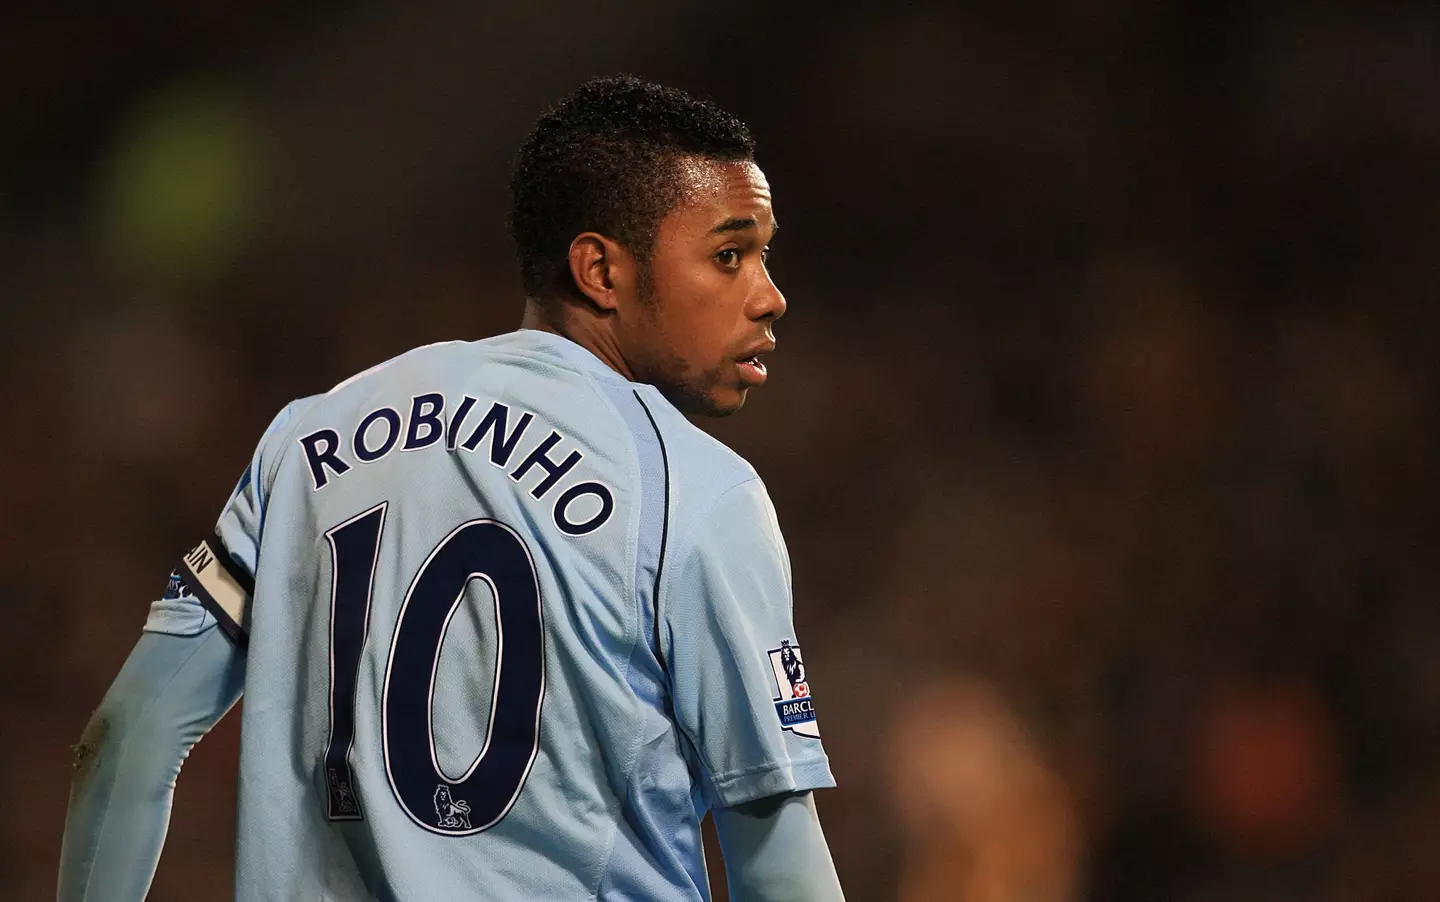 Robinho was the first signing of City's modern era. Image: PA Images